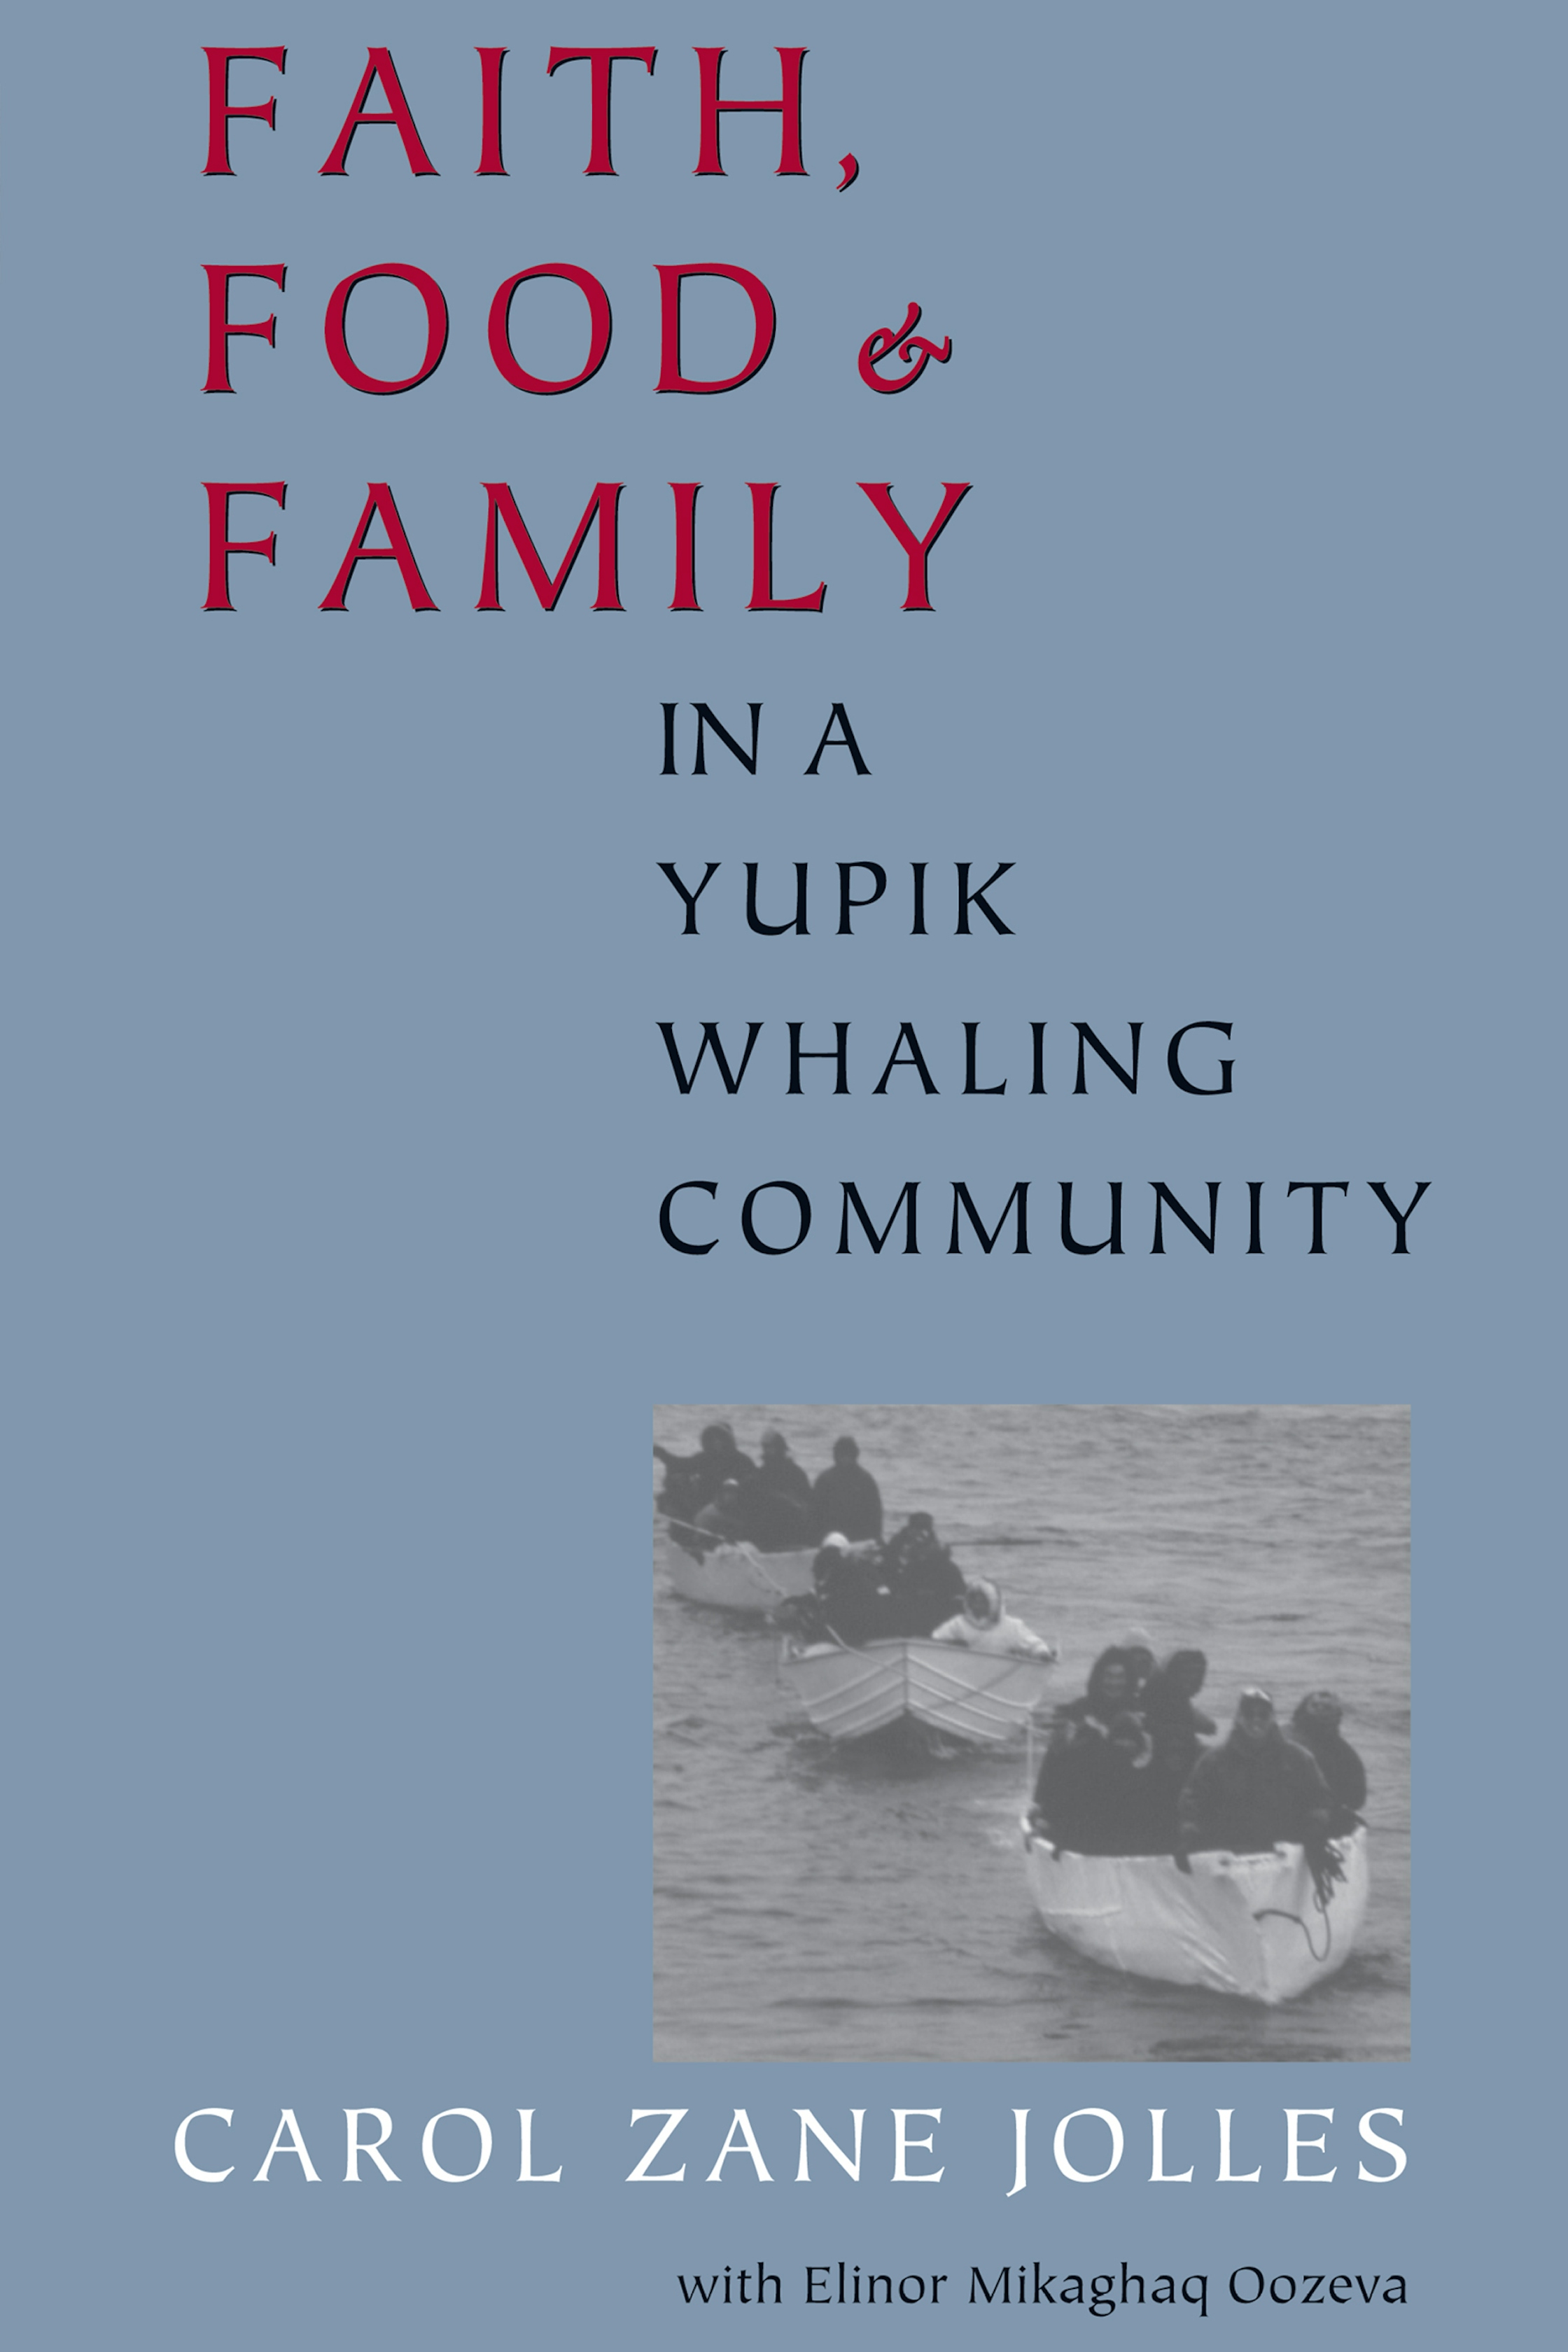 Faith, Food, and Family in a Yupik Whaling Community